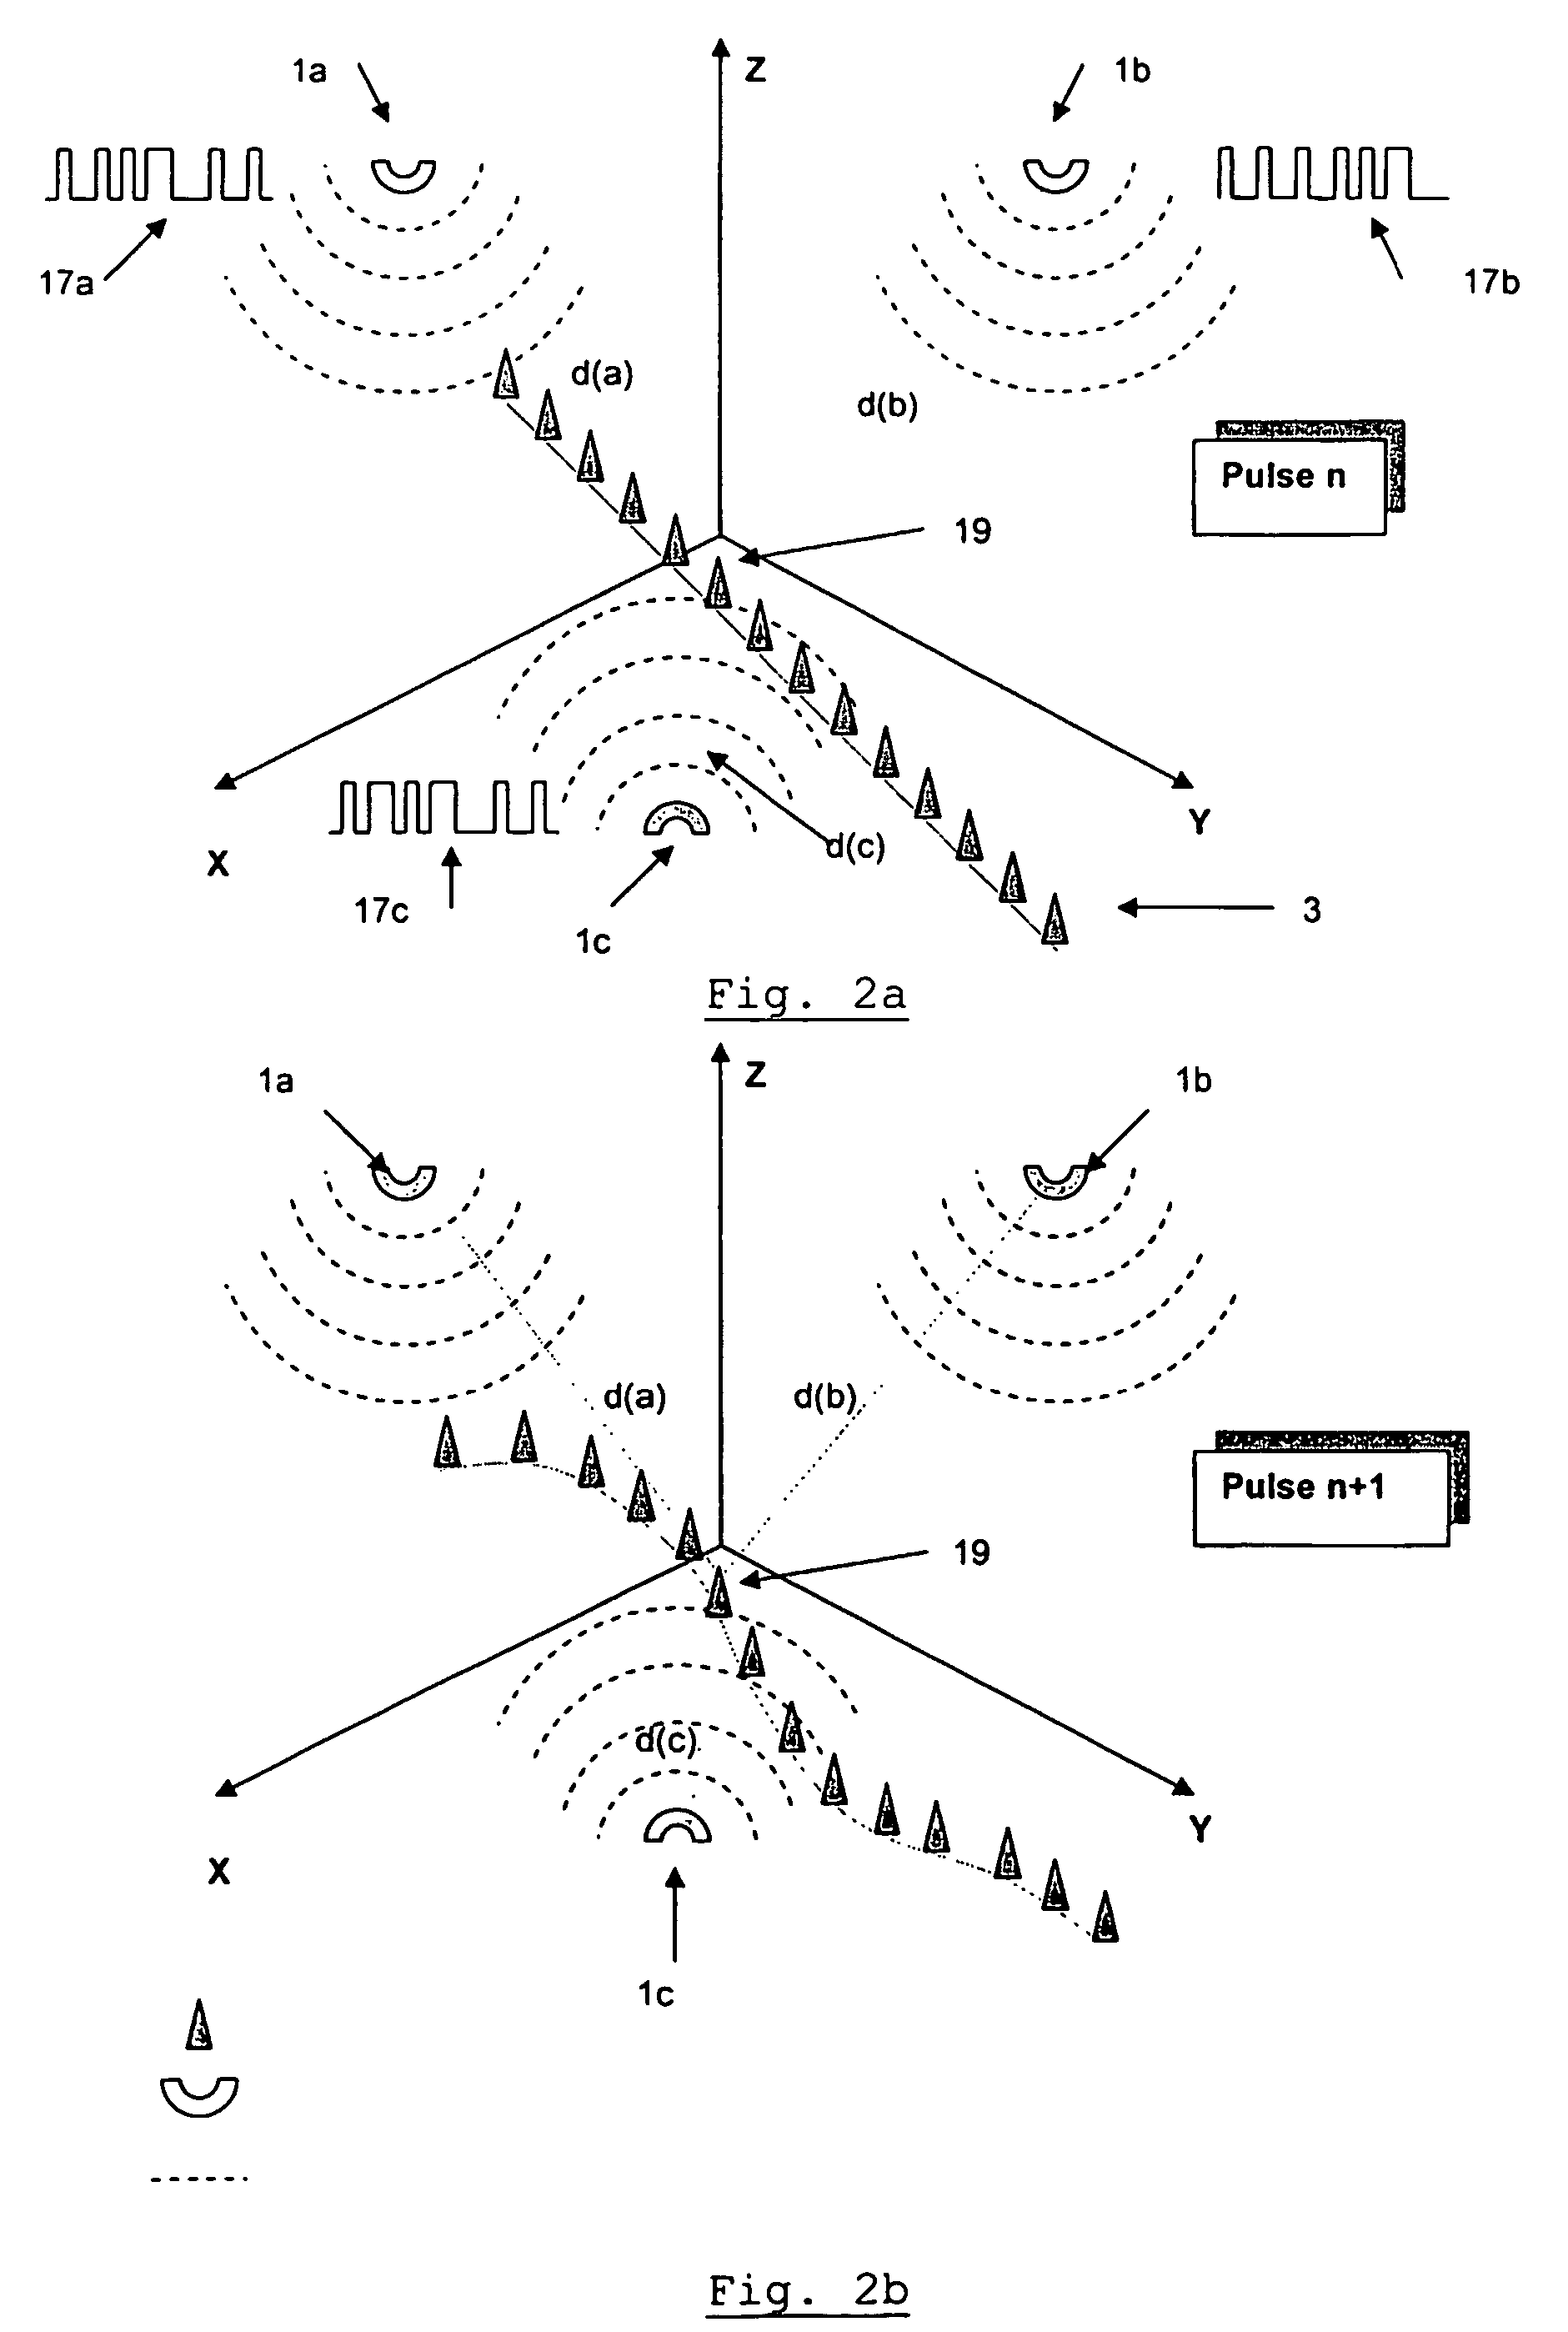 Apparatus and method suitable for measuring the global displacement or load on an aircraft component